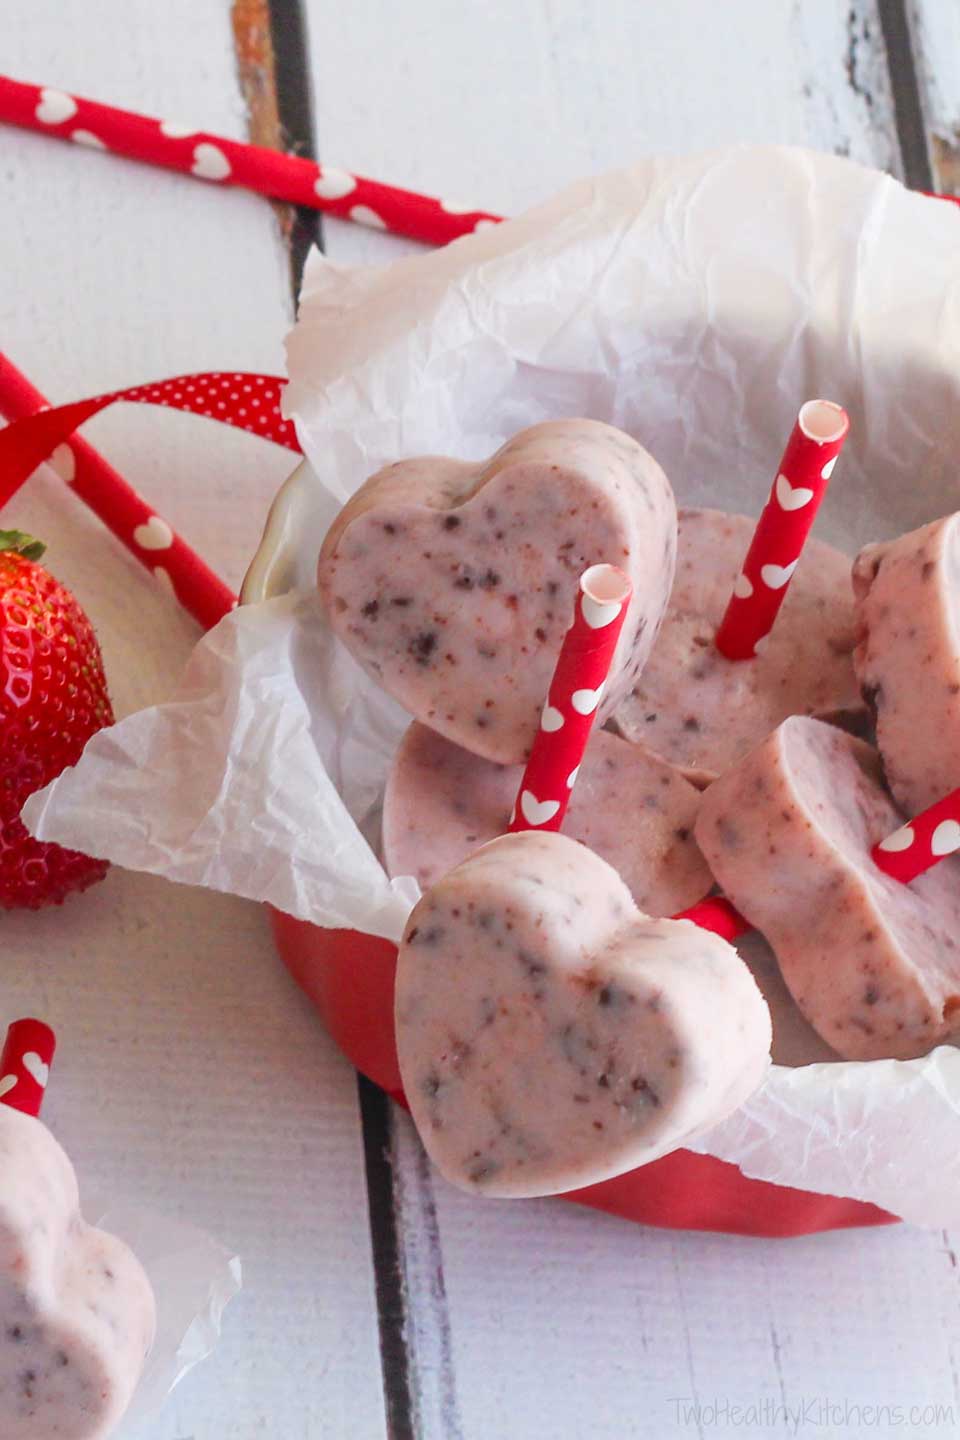 frozen Greek yogurt heart pops with red and white heart-printed sticks, displayed in a red bowl